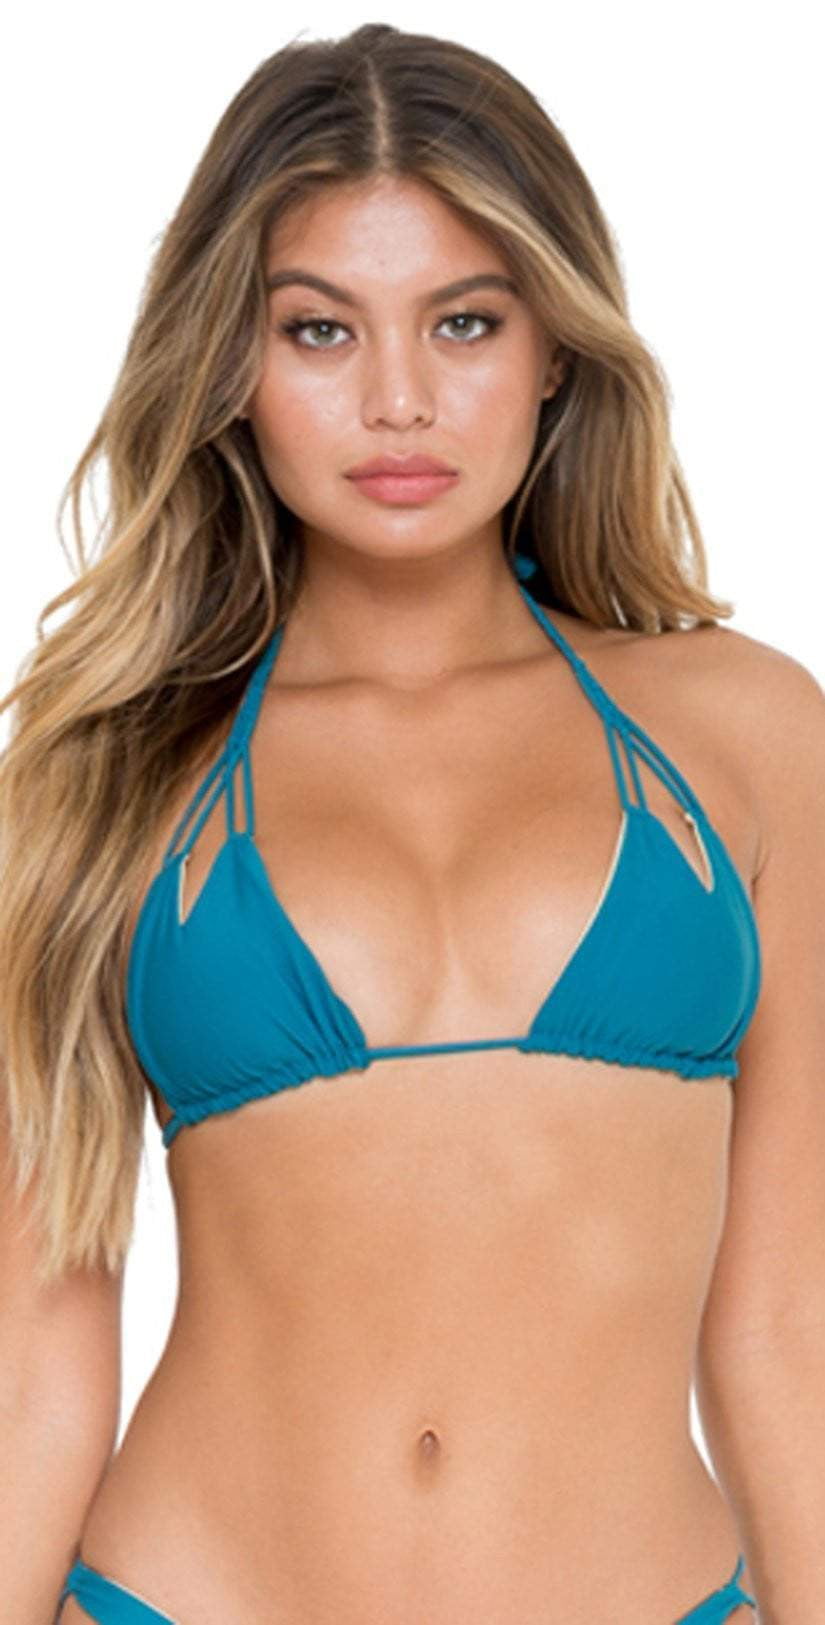 Cosita Buena Molded Push Up Bandeau Halter Top in Teal by Luli Fama